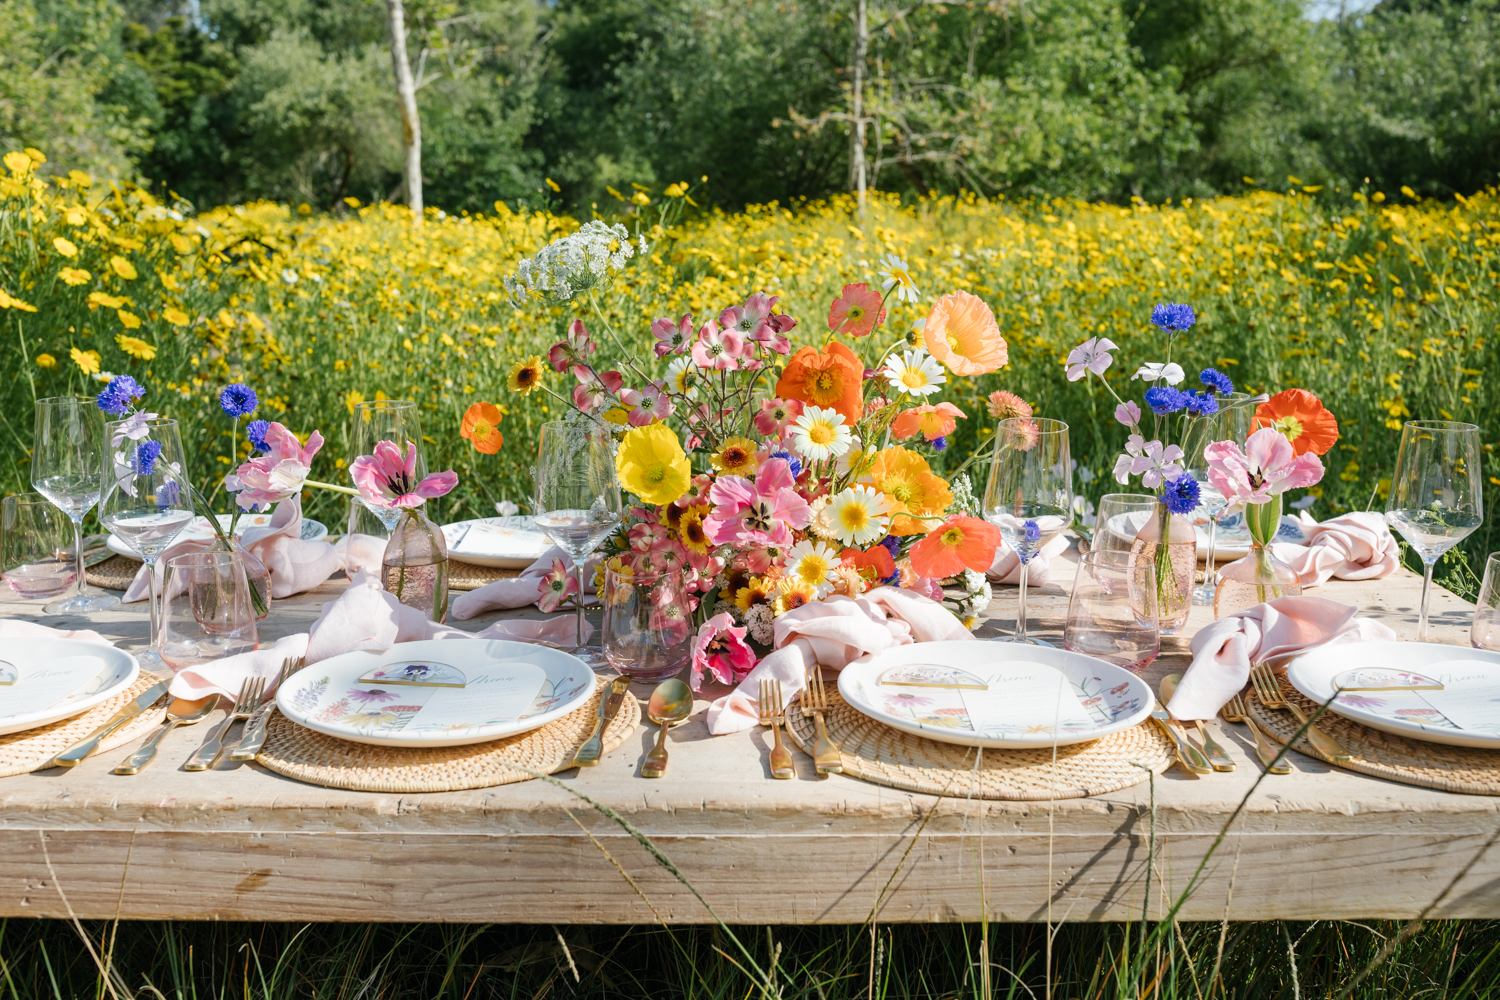 Spring in the Wildflowers with Sur La Table